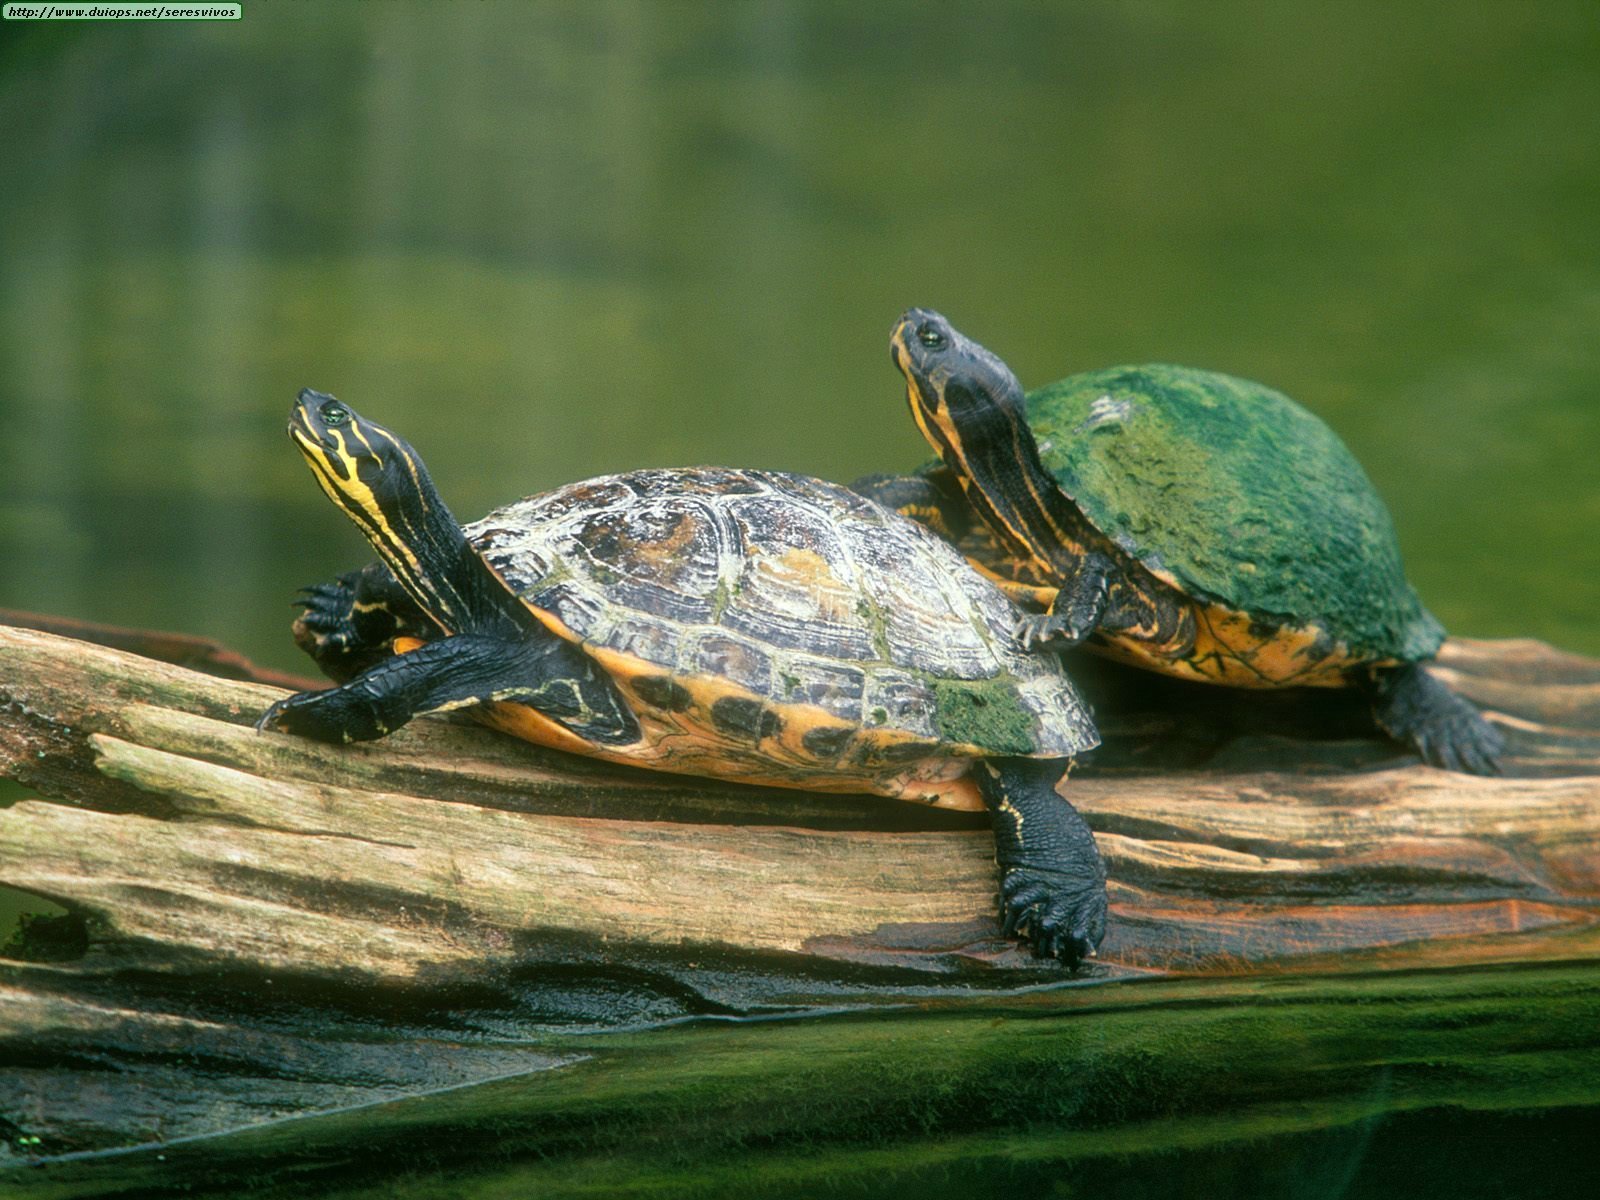 Turtles Image HD Wallpaper And Background Photos